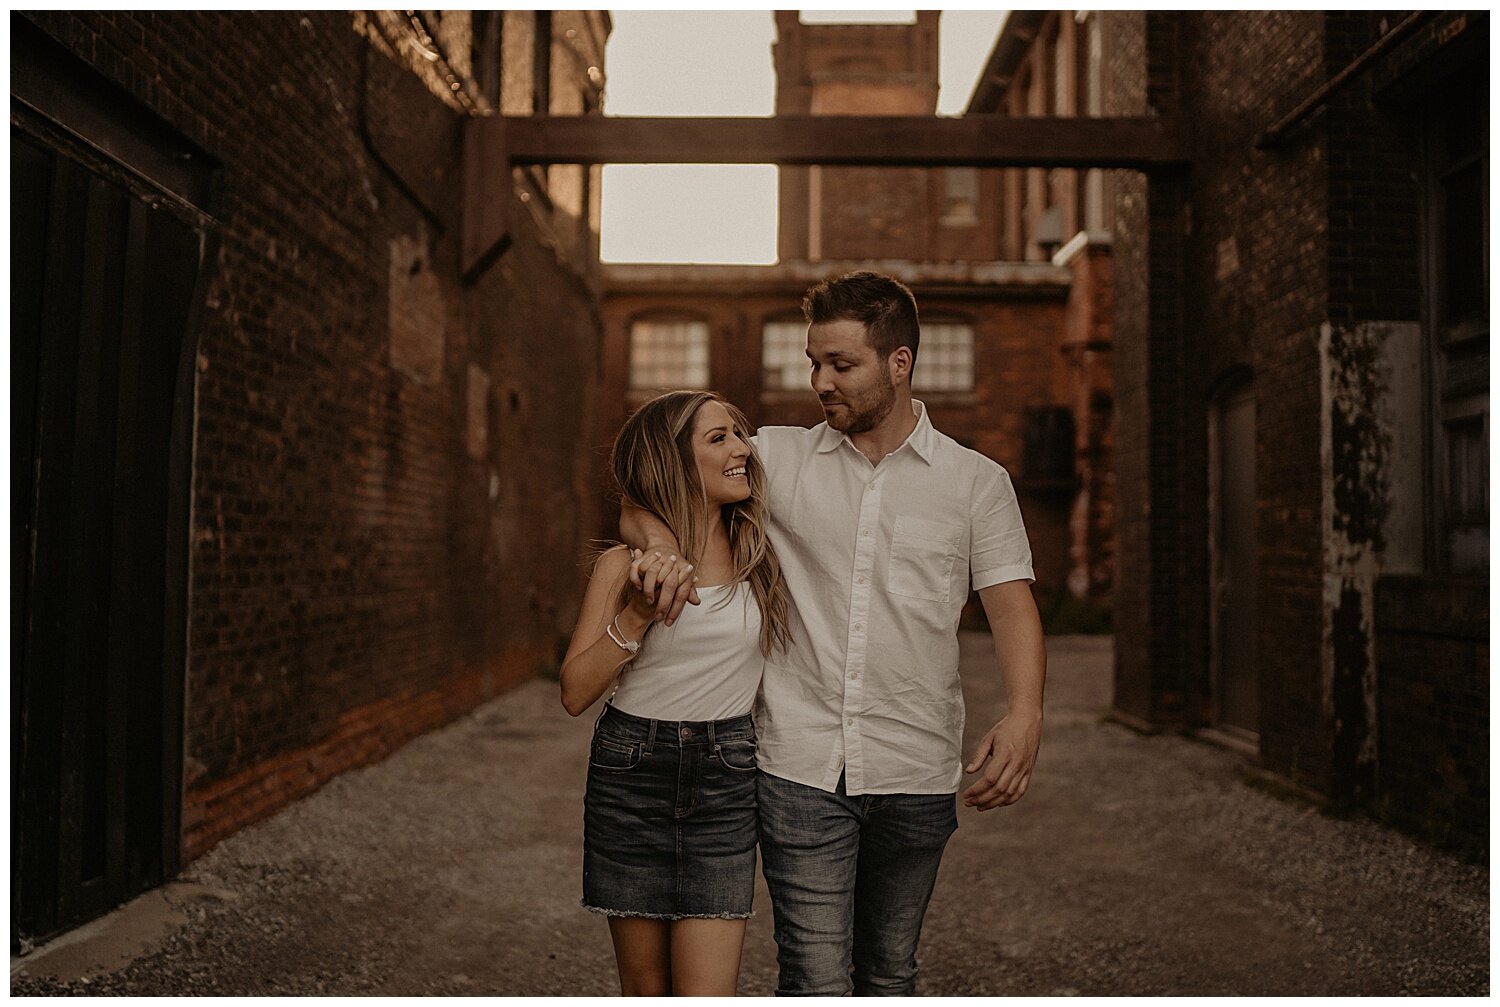 Cotton_Factory_And_Waterfall_Engagement_Session_Hamilton_Ontario_Wedding_Photographer_0079.jpg